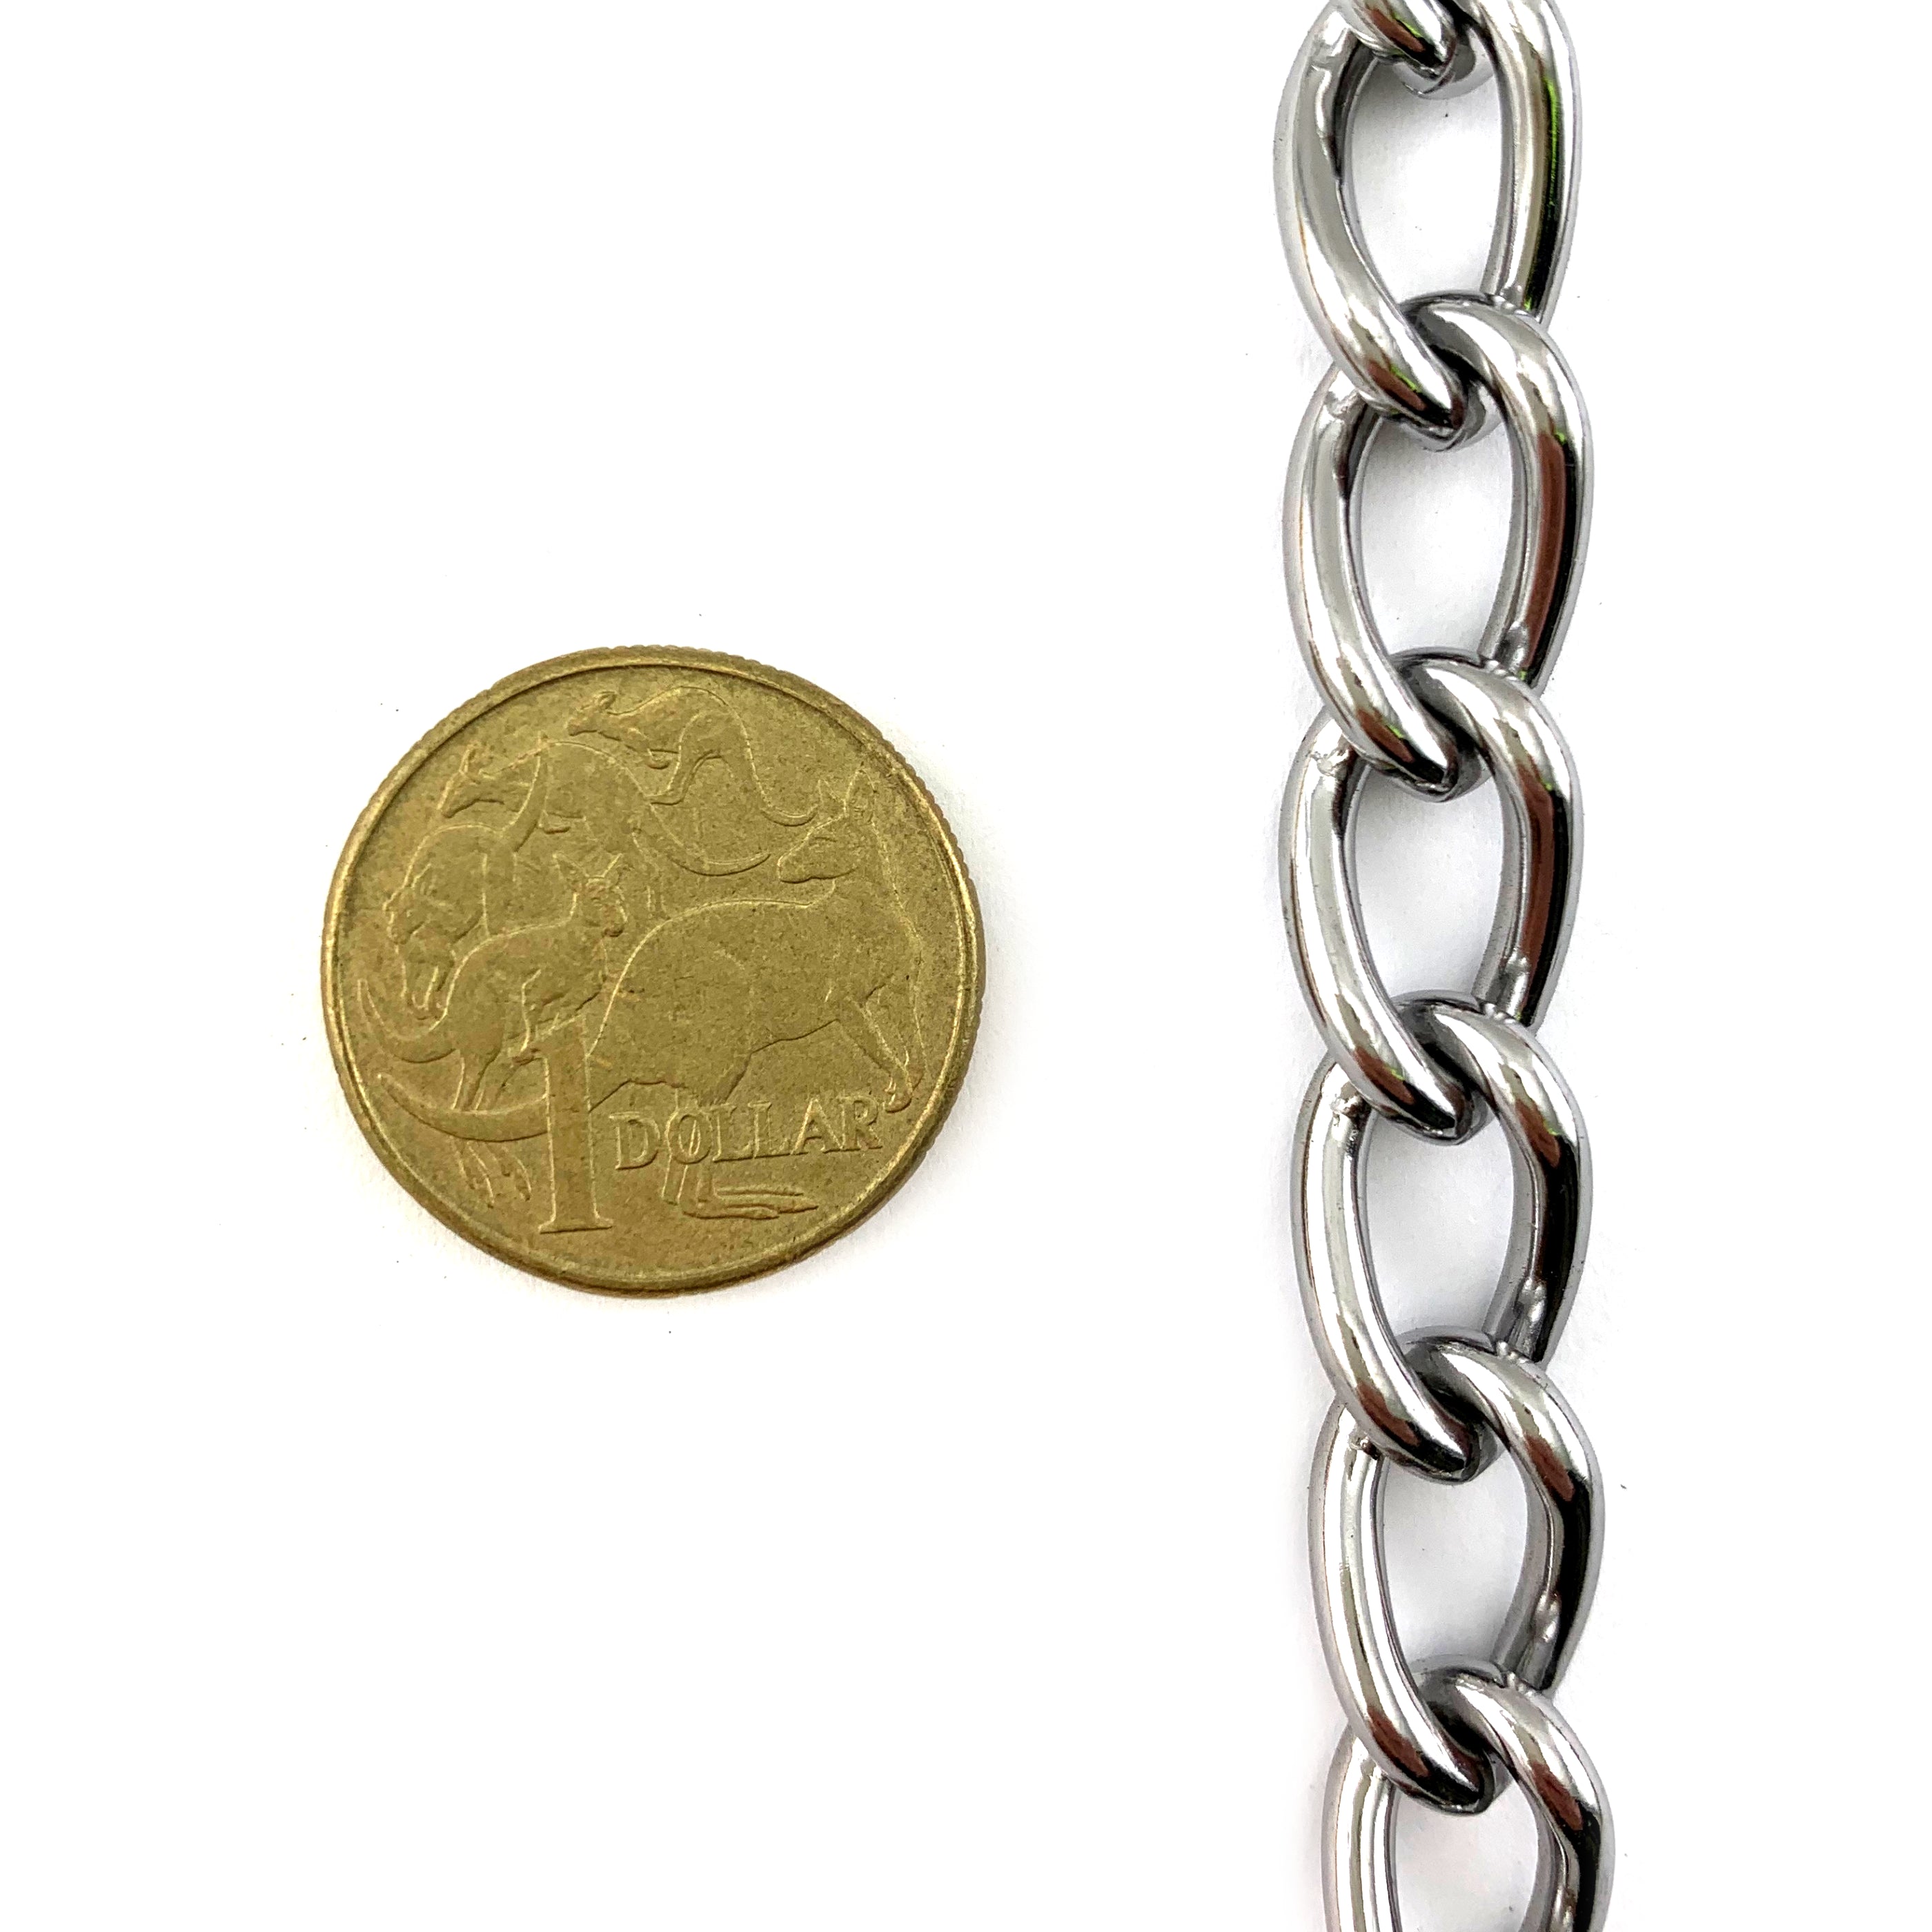 Decorative Commercial Chrome Curb Chain - size 3mm. By the metre. Australia wide delivery